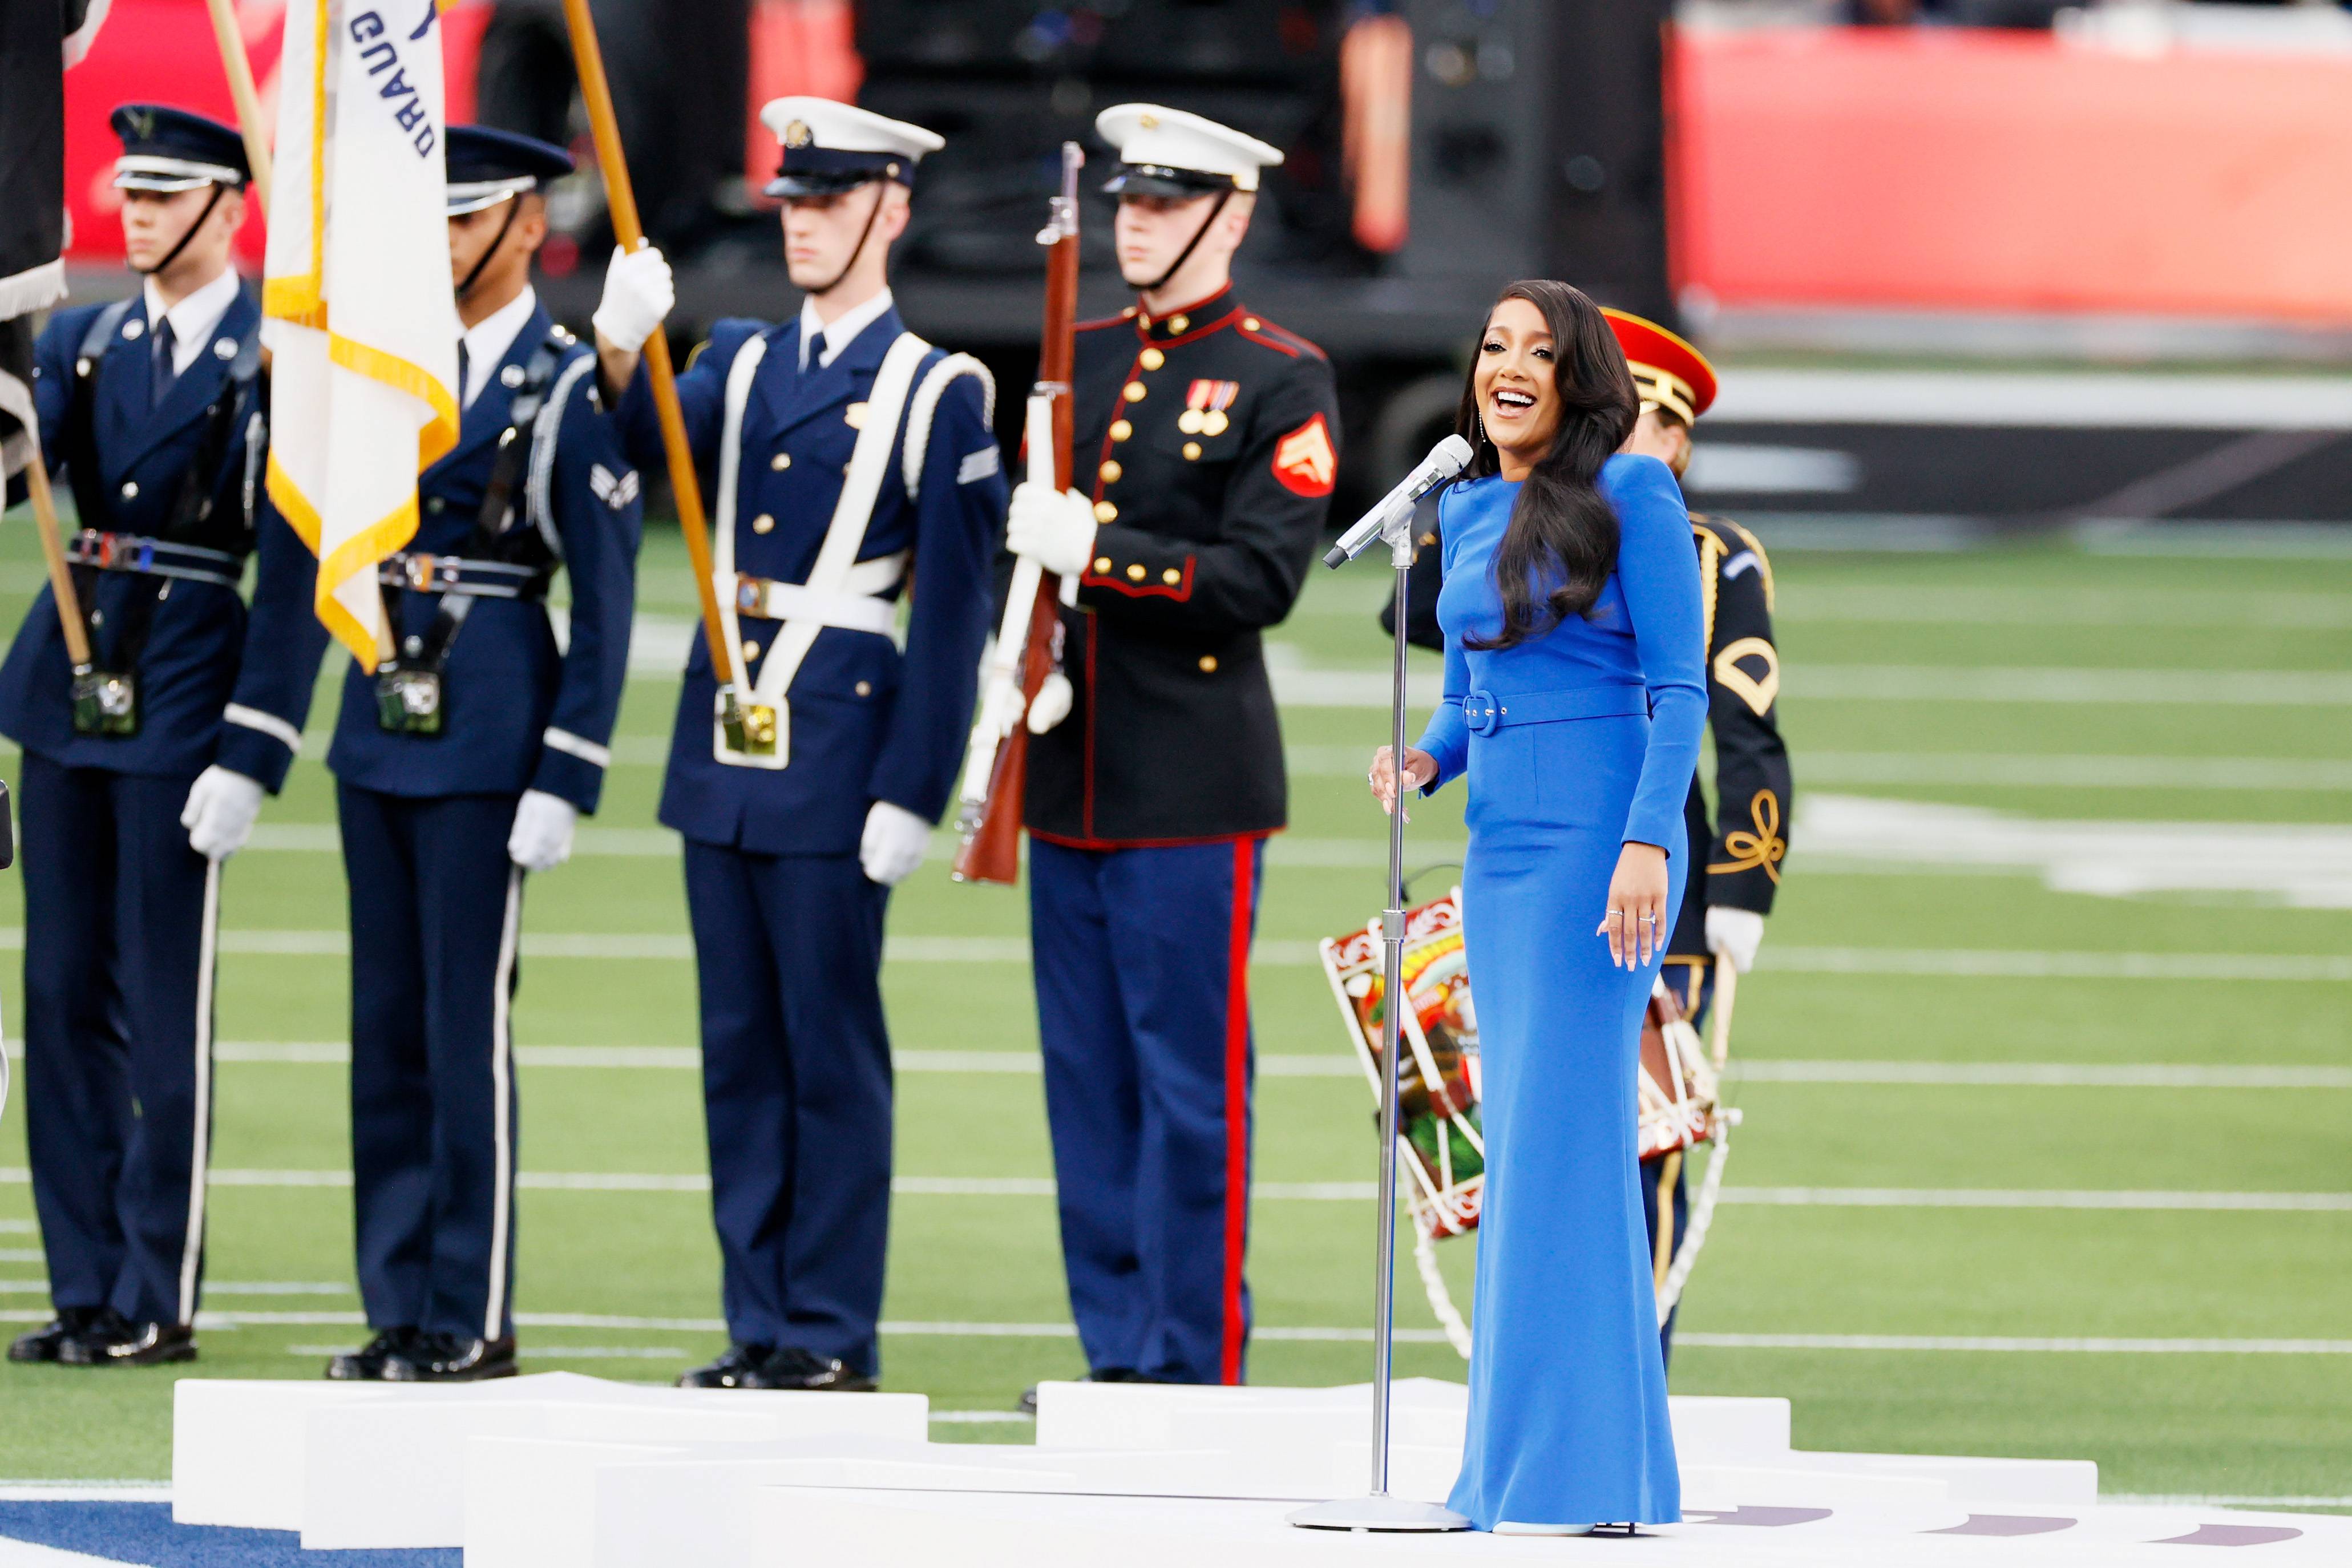 Super Bowl 2022: Who is singing the national anthem? Mickey Guyton